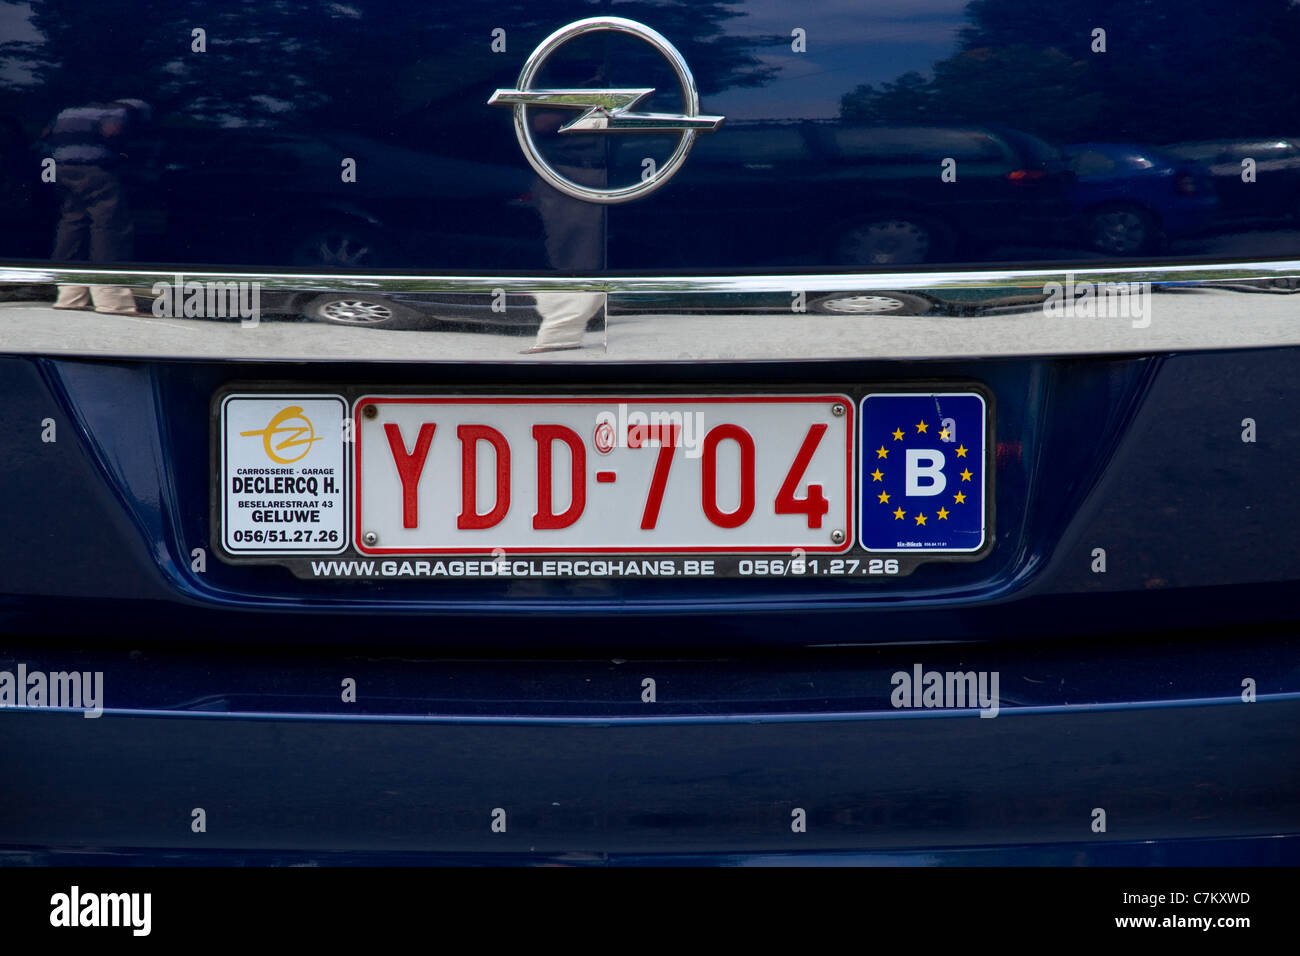 Belgian number plate on blue Opel car in France Stock Photo